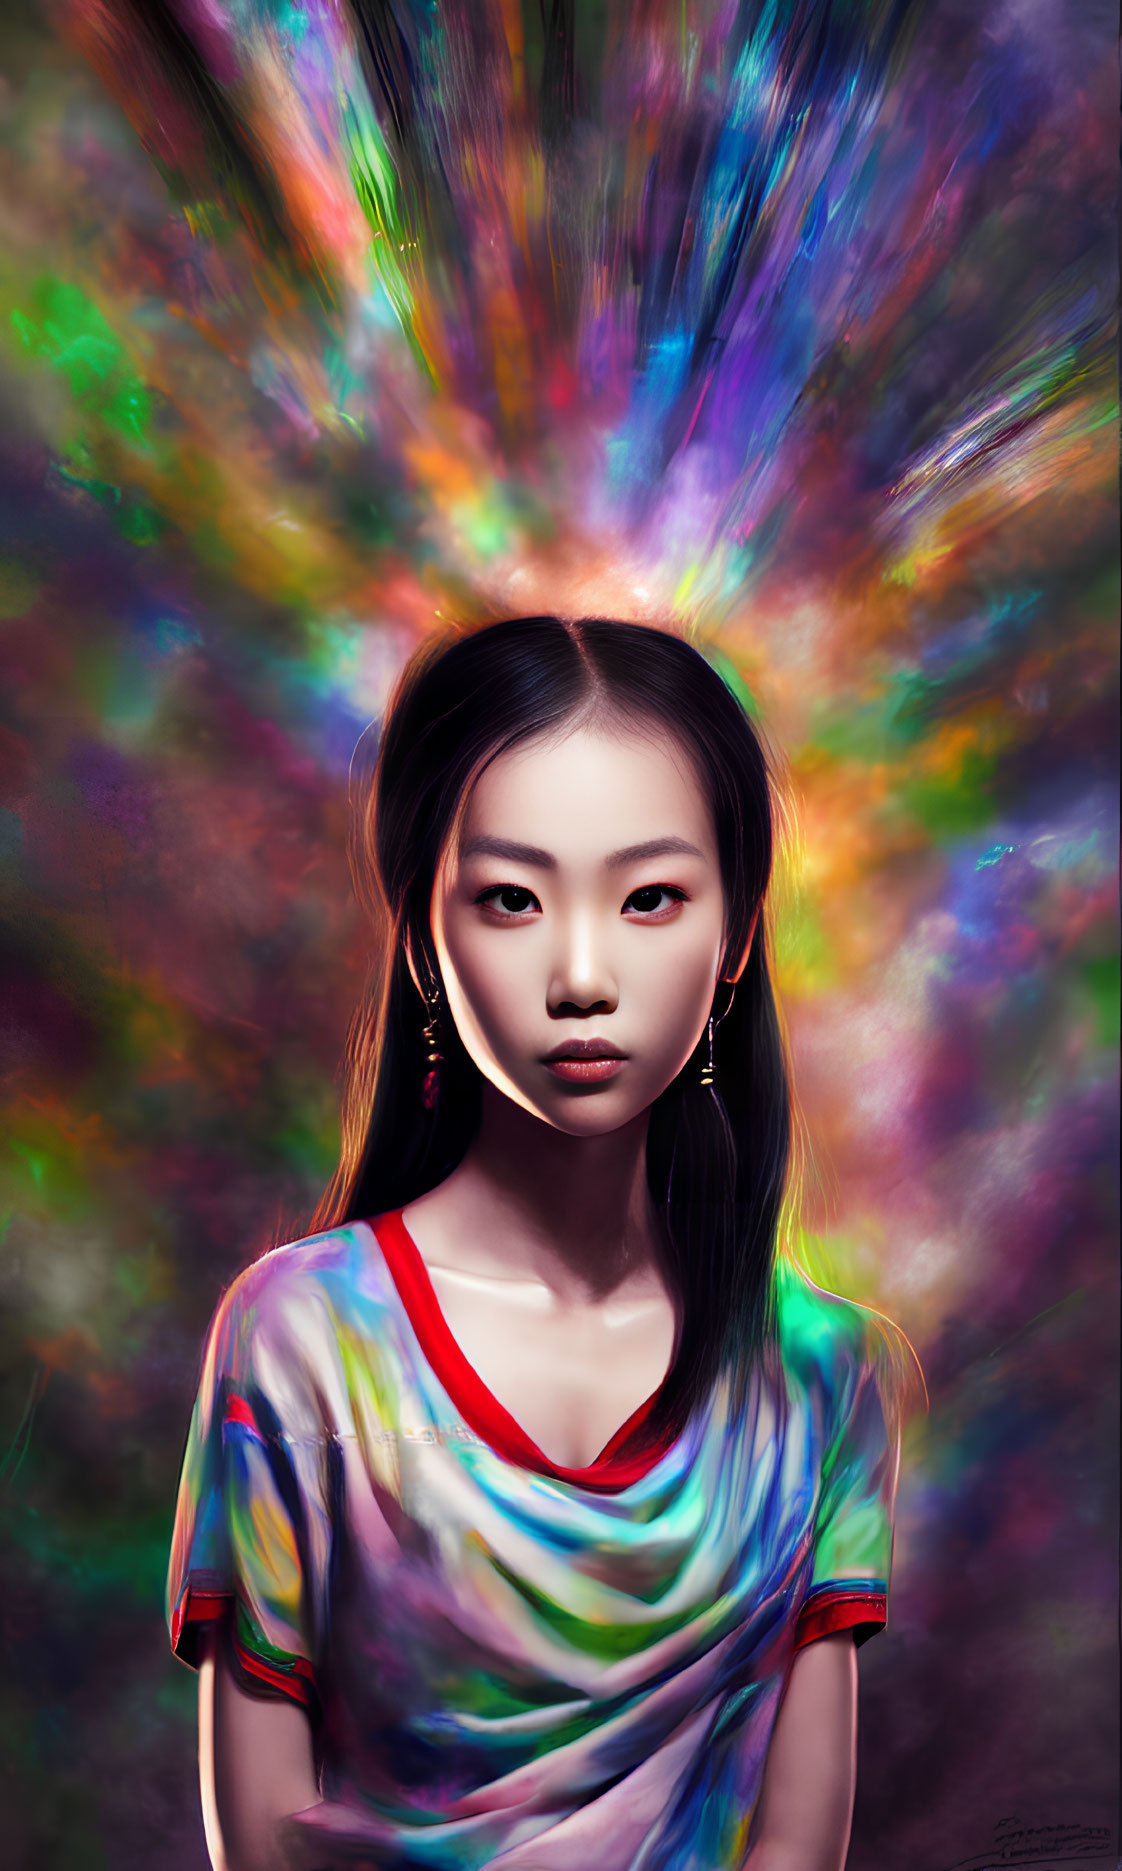 Intense gaze of young woman in tie-dye shirt against vibrant abstract colors